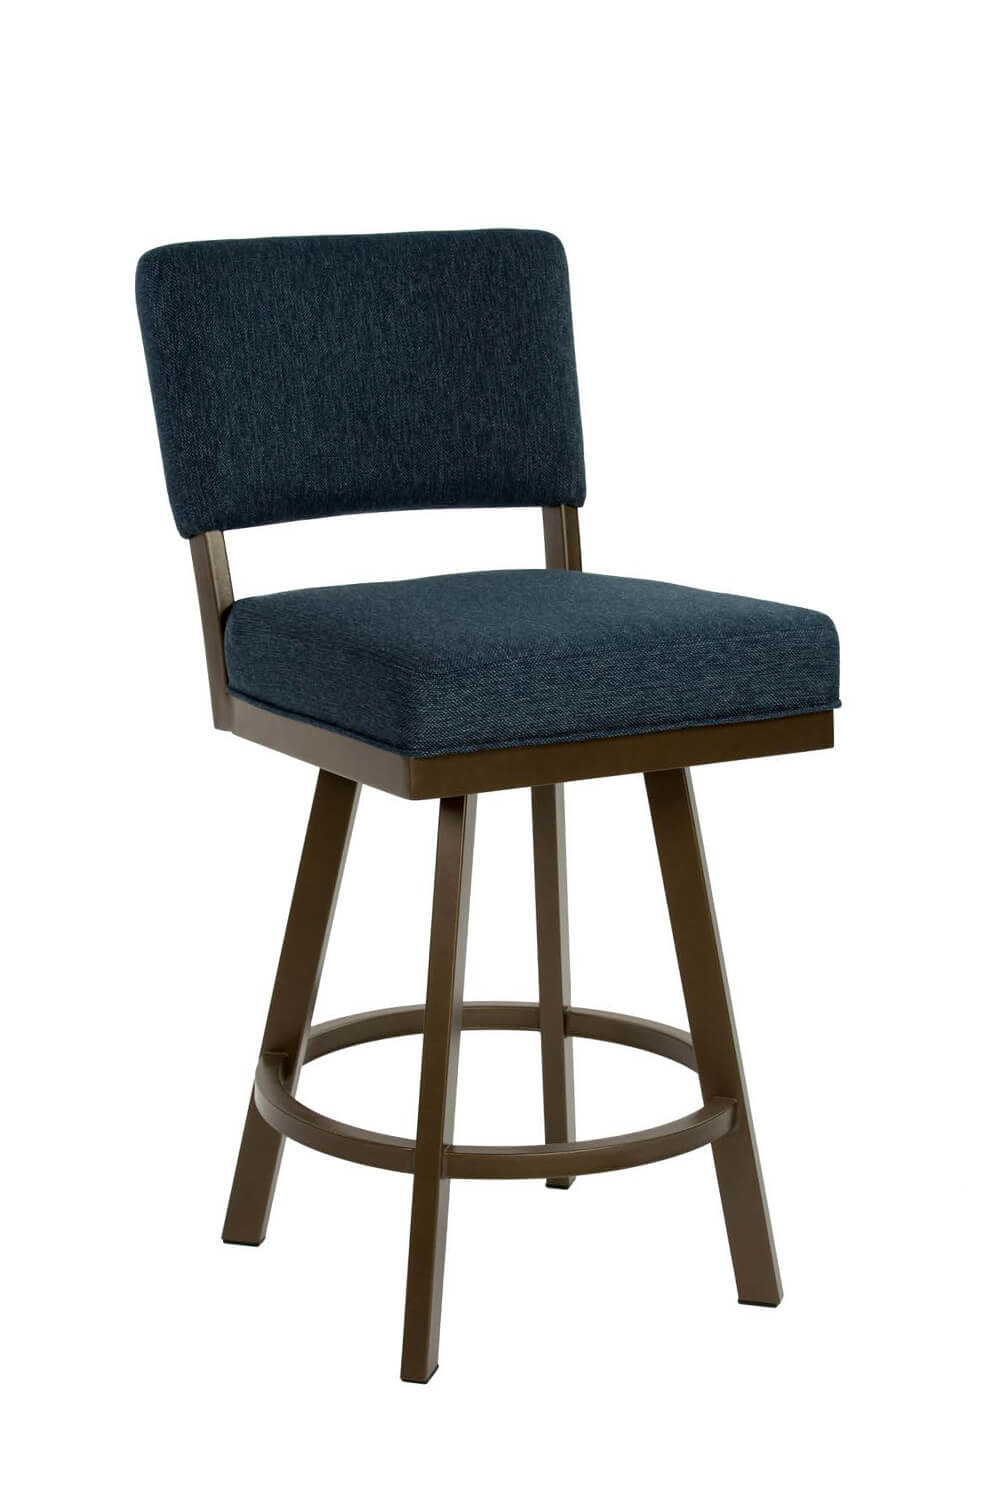 Cushioned Stool With Back Off 65, Cushioned Swivel Bar Stools With Backs